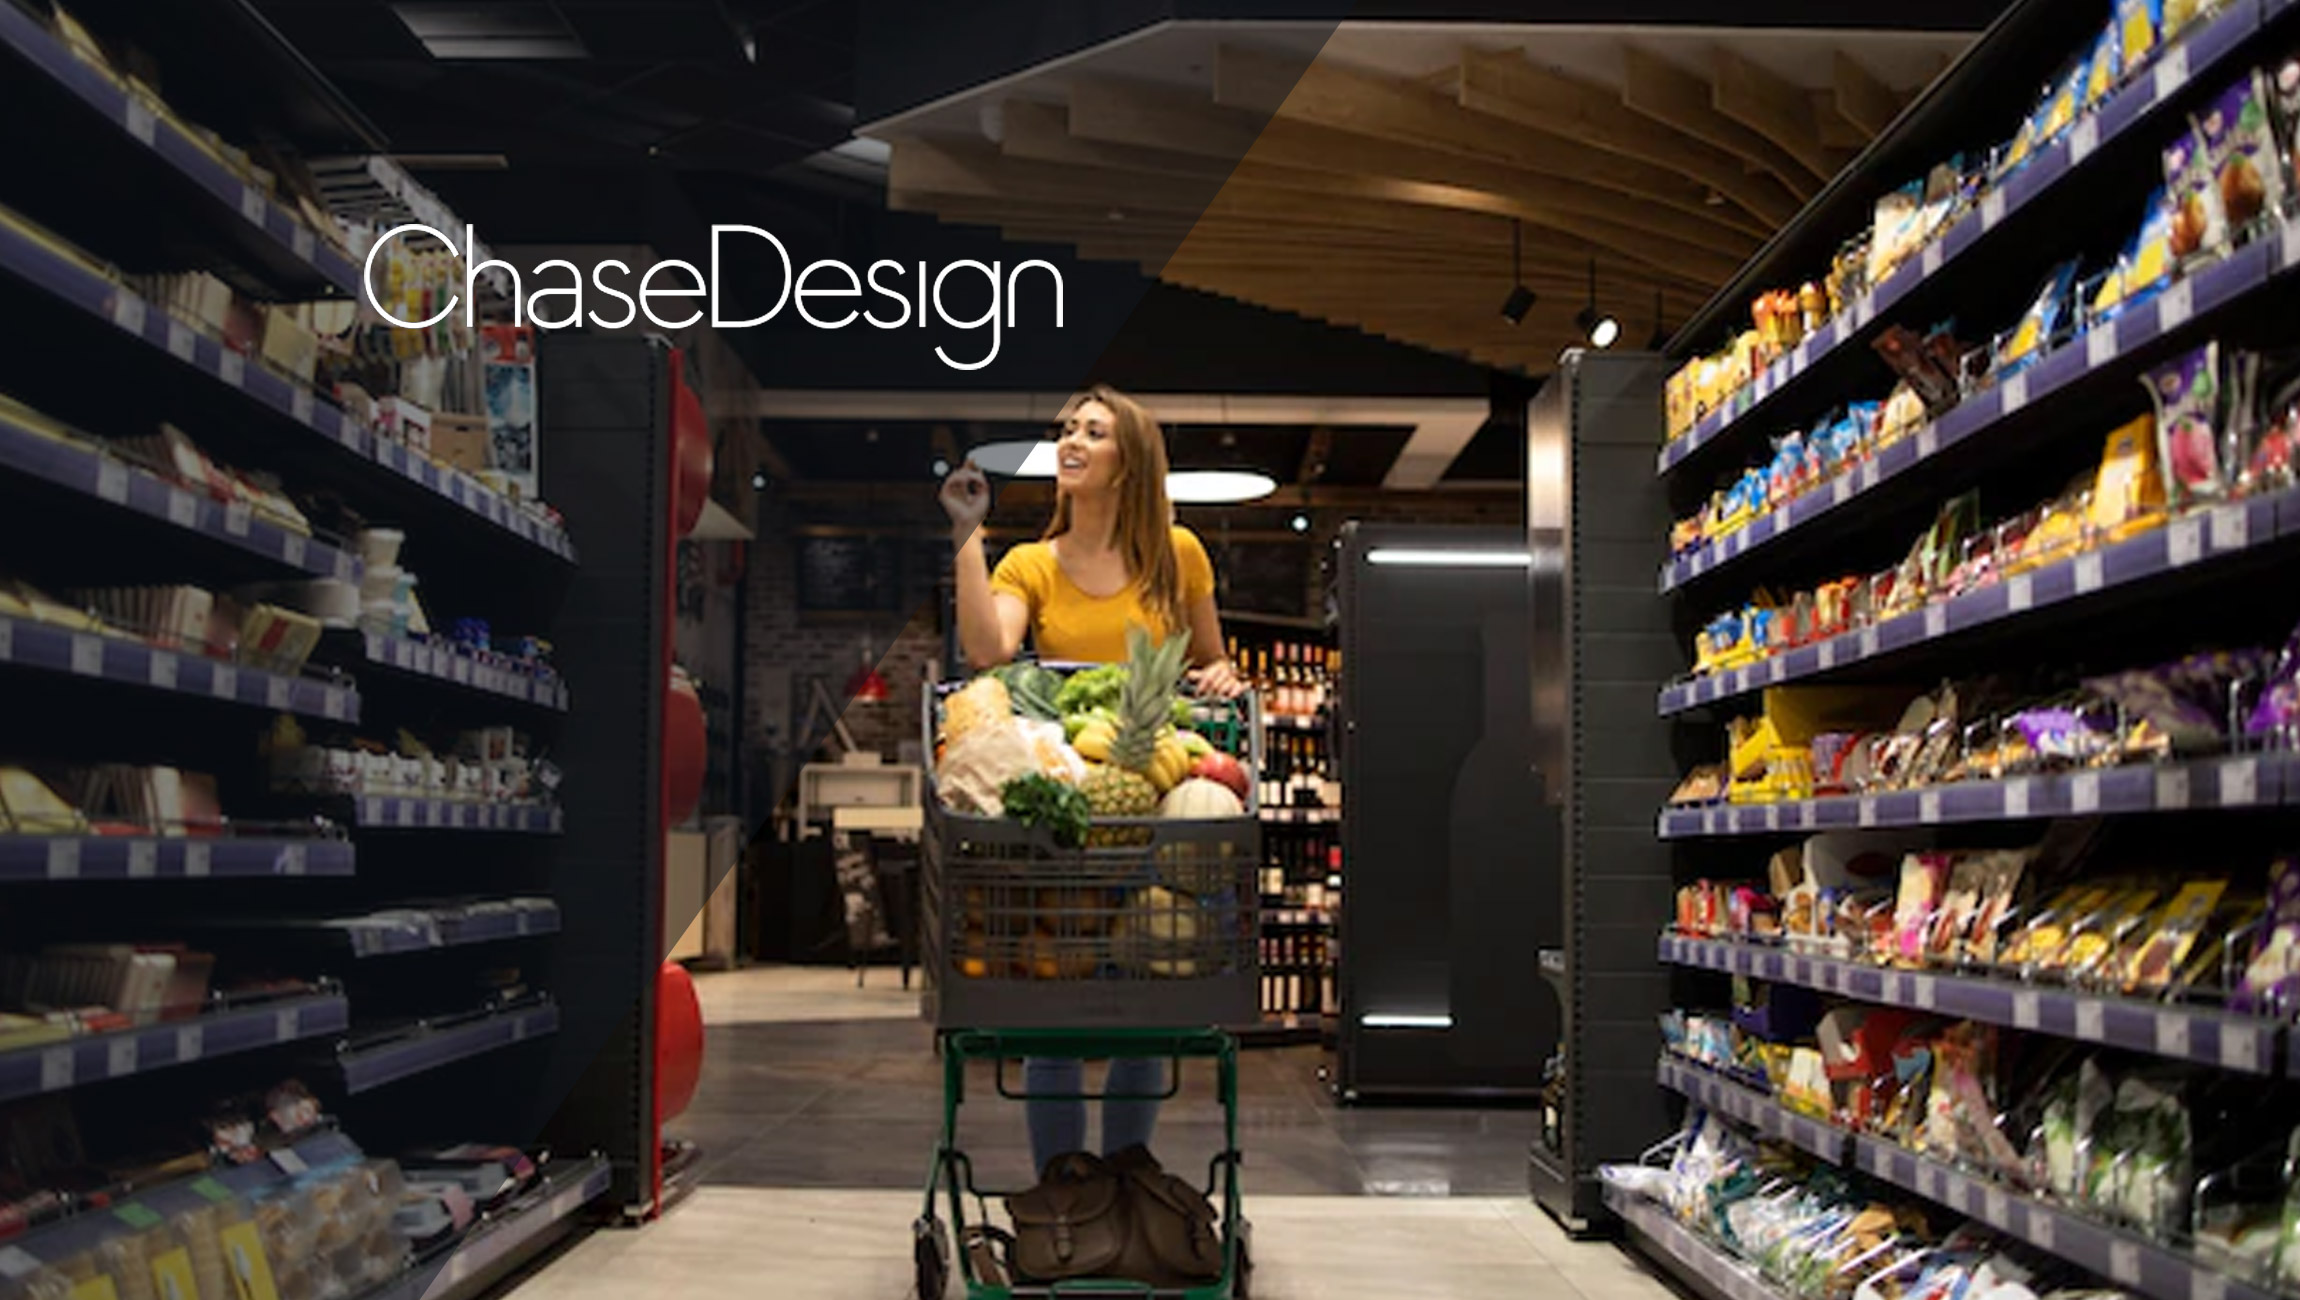 Shoppers-Are-Excited-to-Get-Back-to-a-Reinvented-In-Store-Experience_-New-ChaseDesign-Survey-Reveals